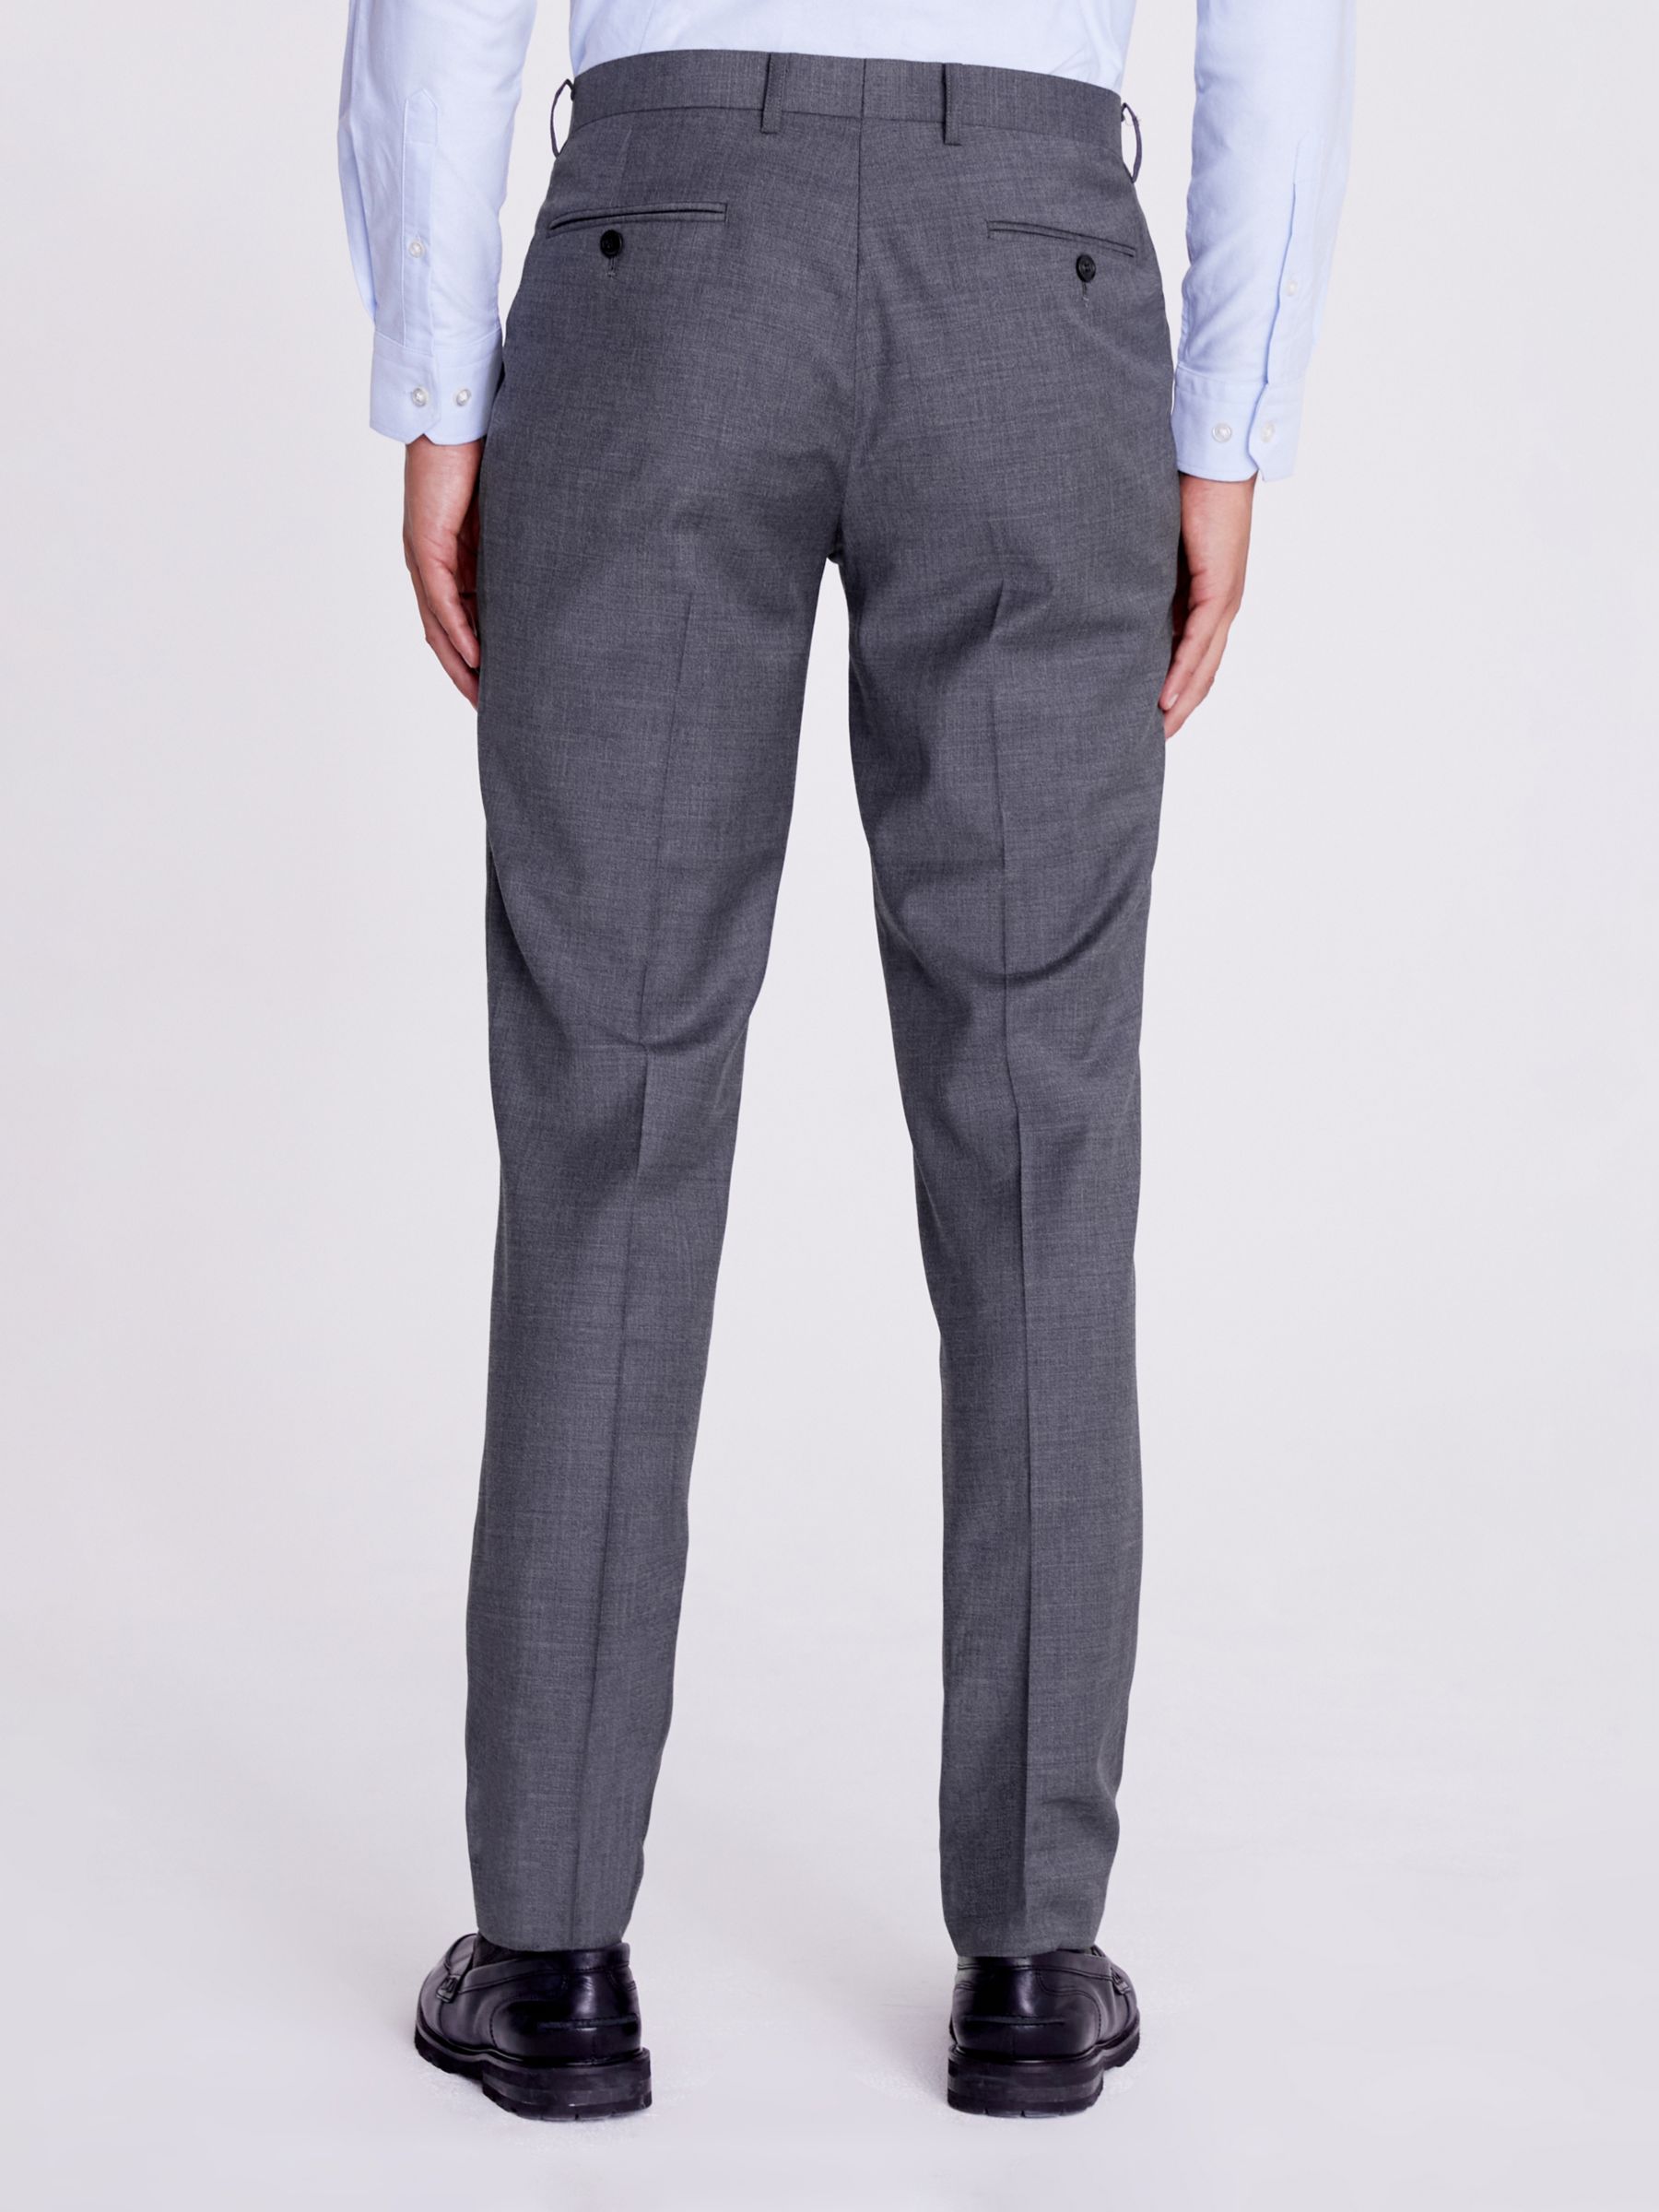 Moss Tailored Twill Suit Trousers, Grey at John Lewis & Partners